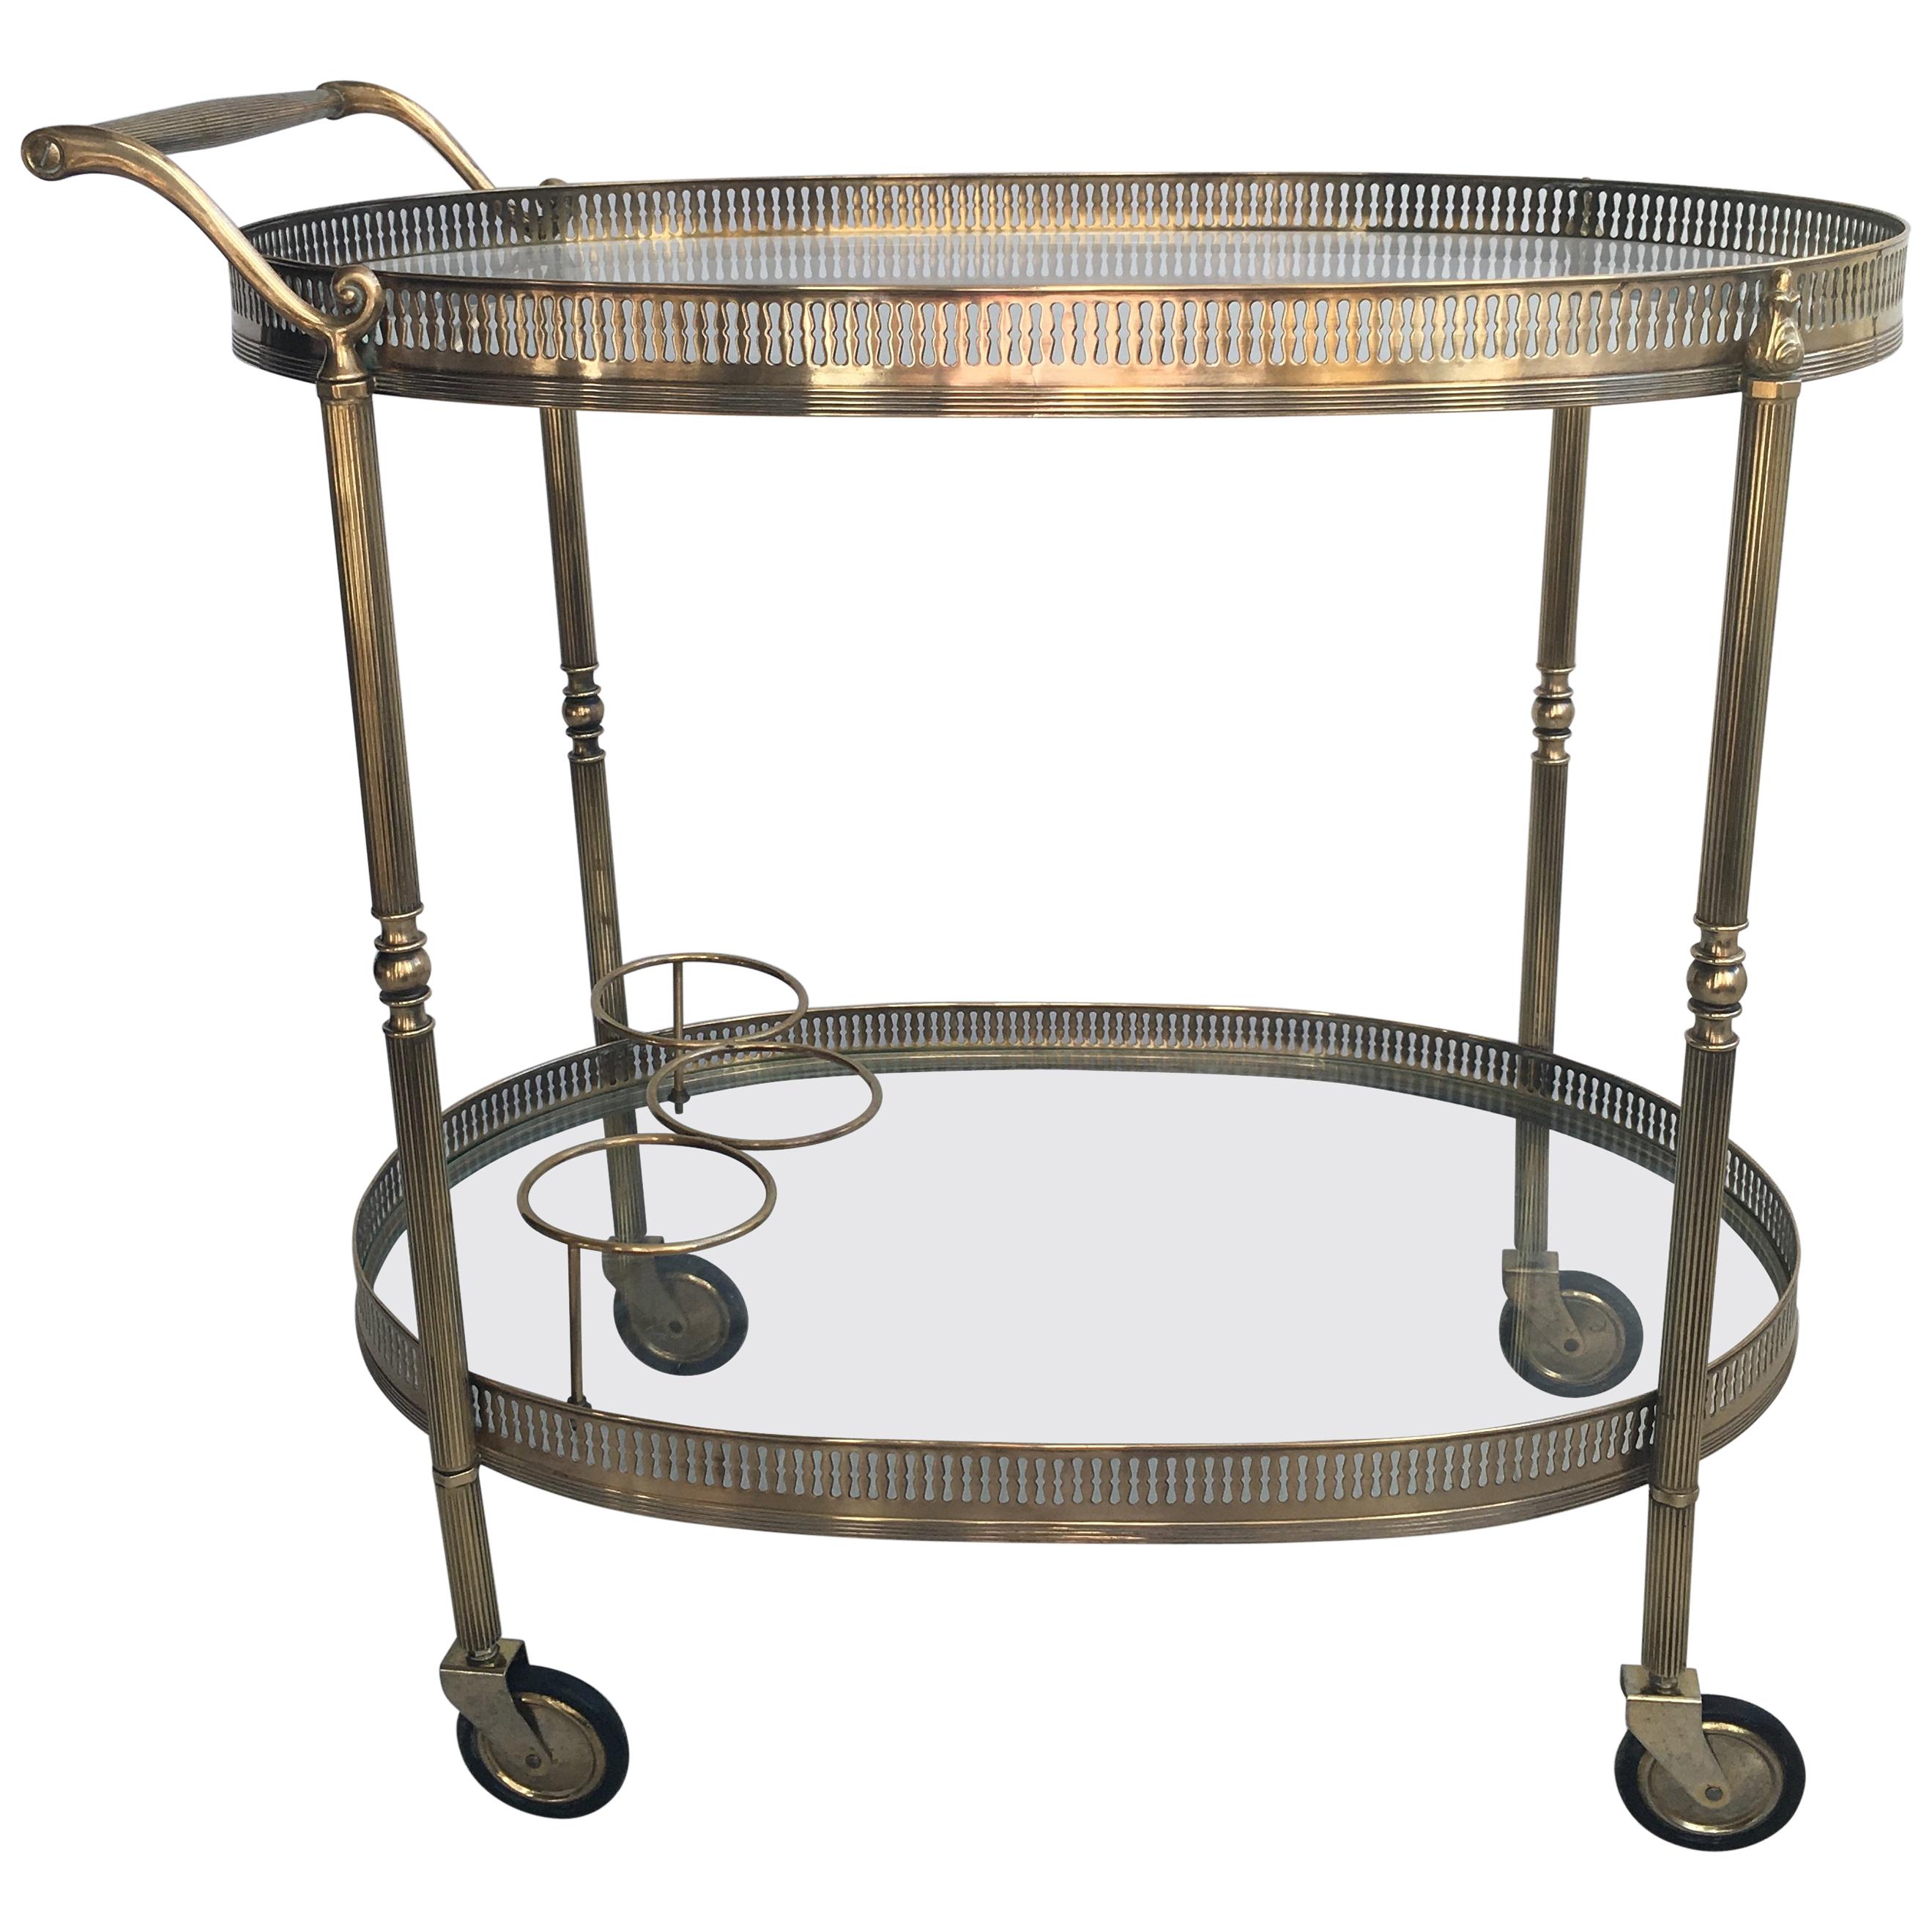 Vintage French Brass Oval Drinks Trolley or Bar Cart